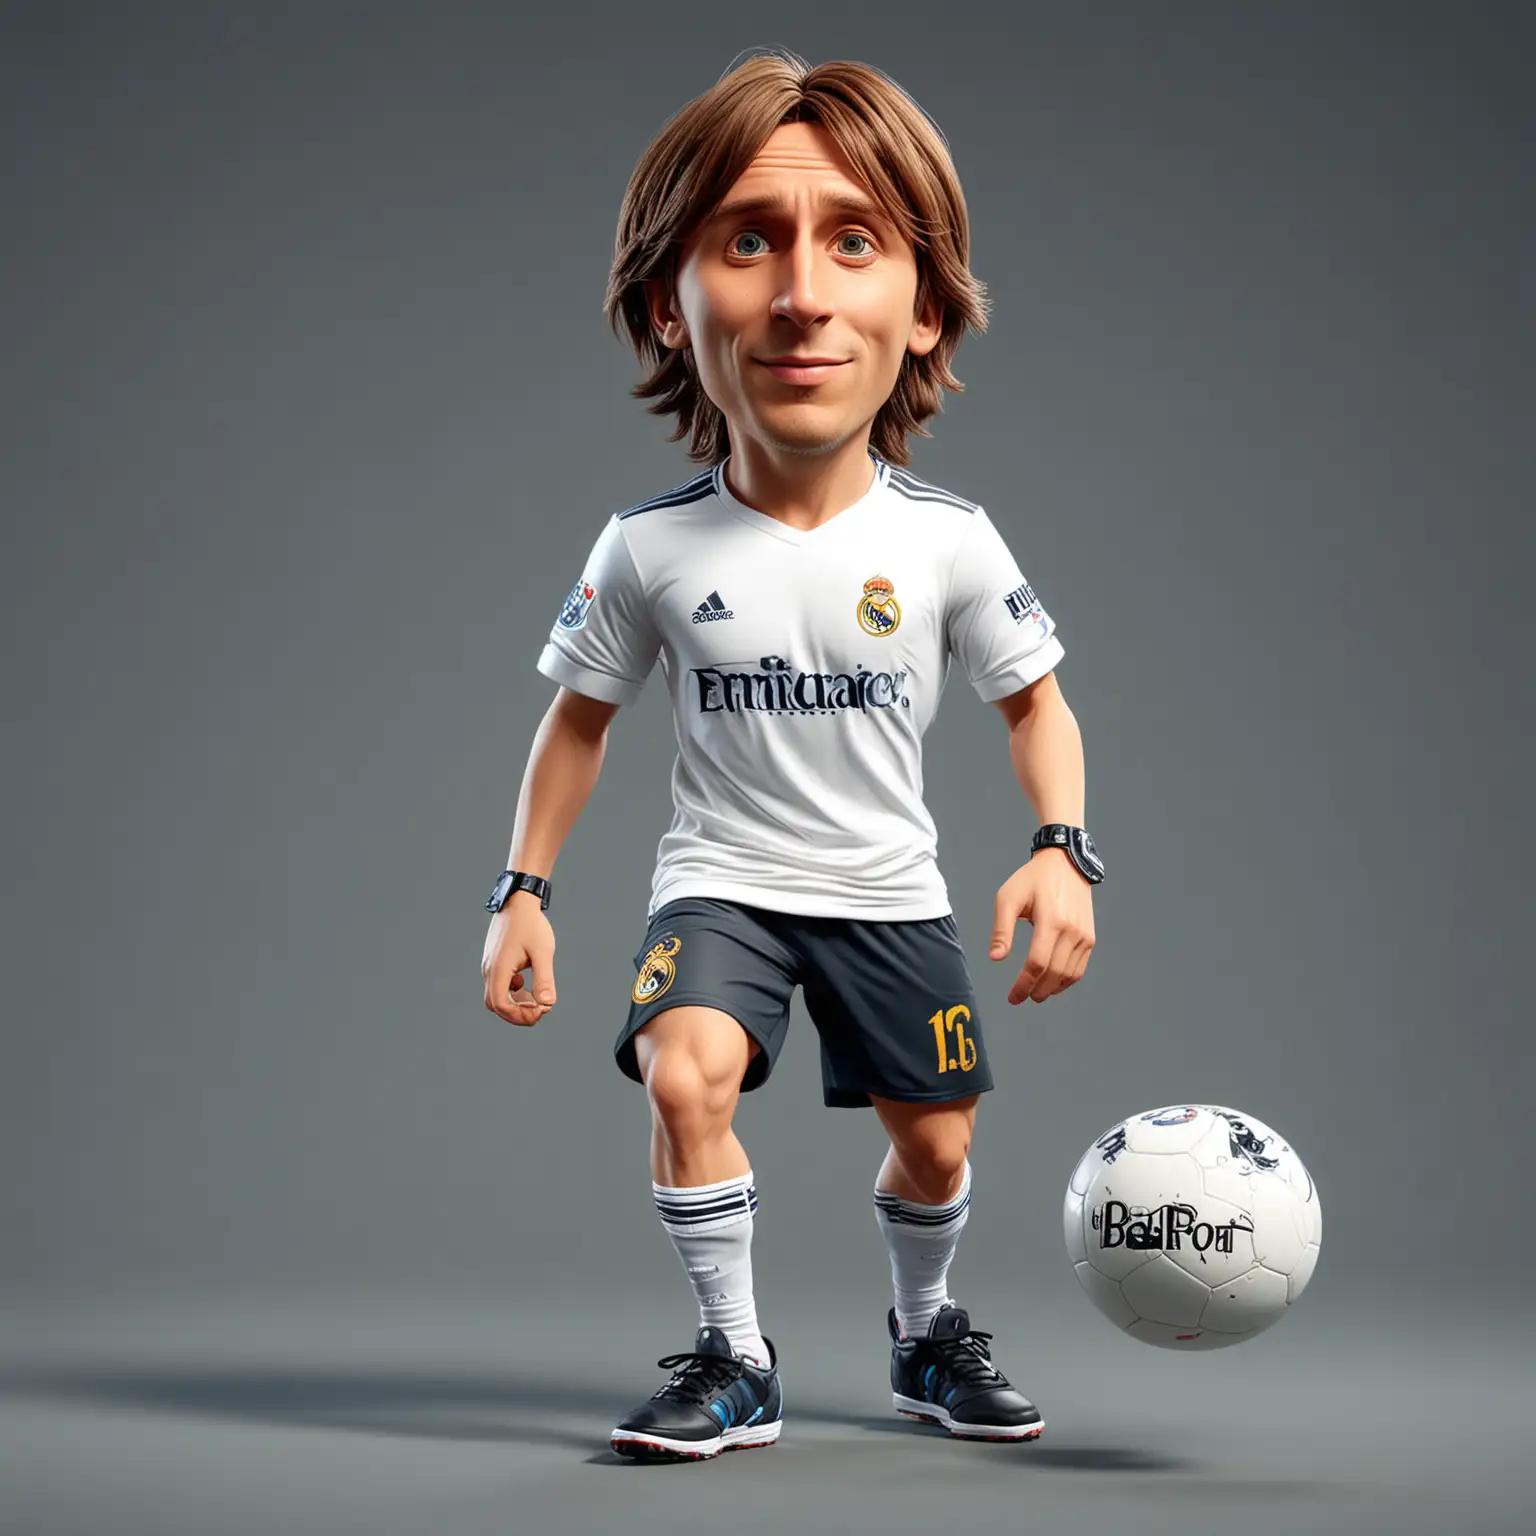 Draw the image of Luka Modrić
IN Real Madrid T-SHIRT , dribbling the ball ,

, 3d cartoon,wearing shoes,